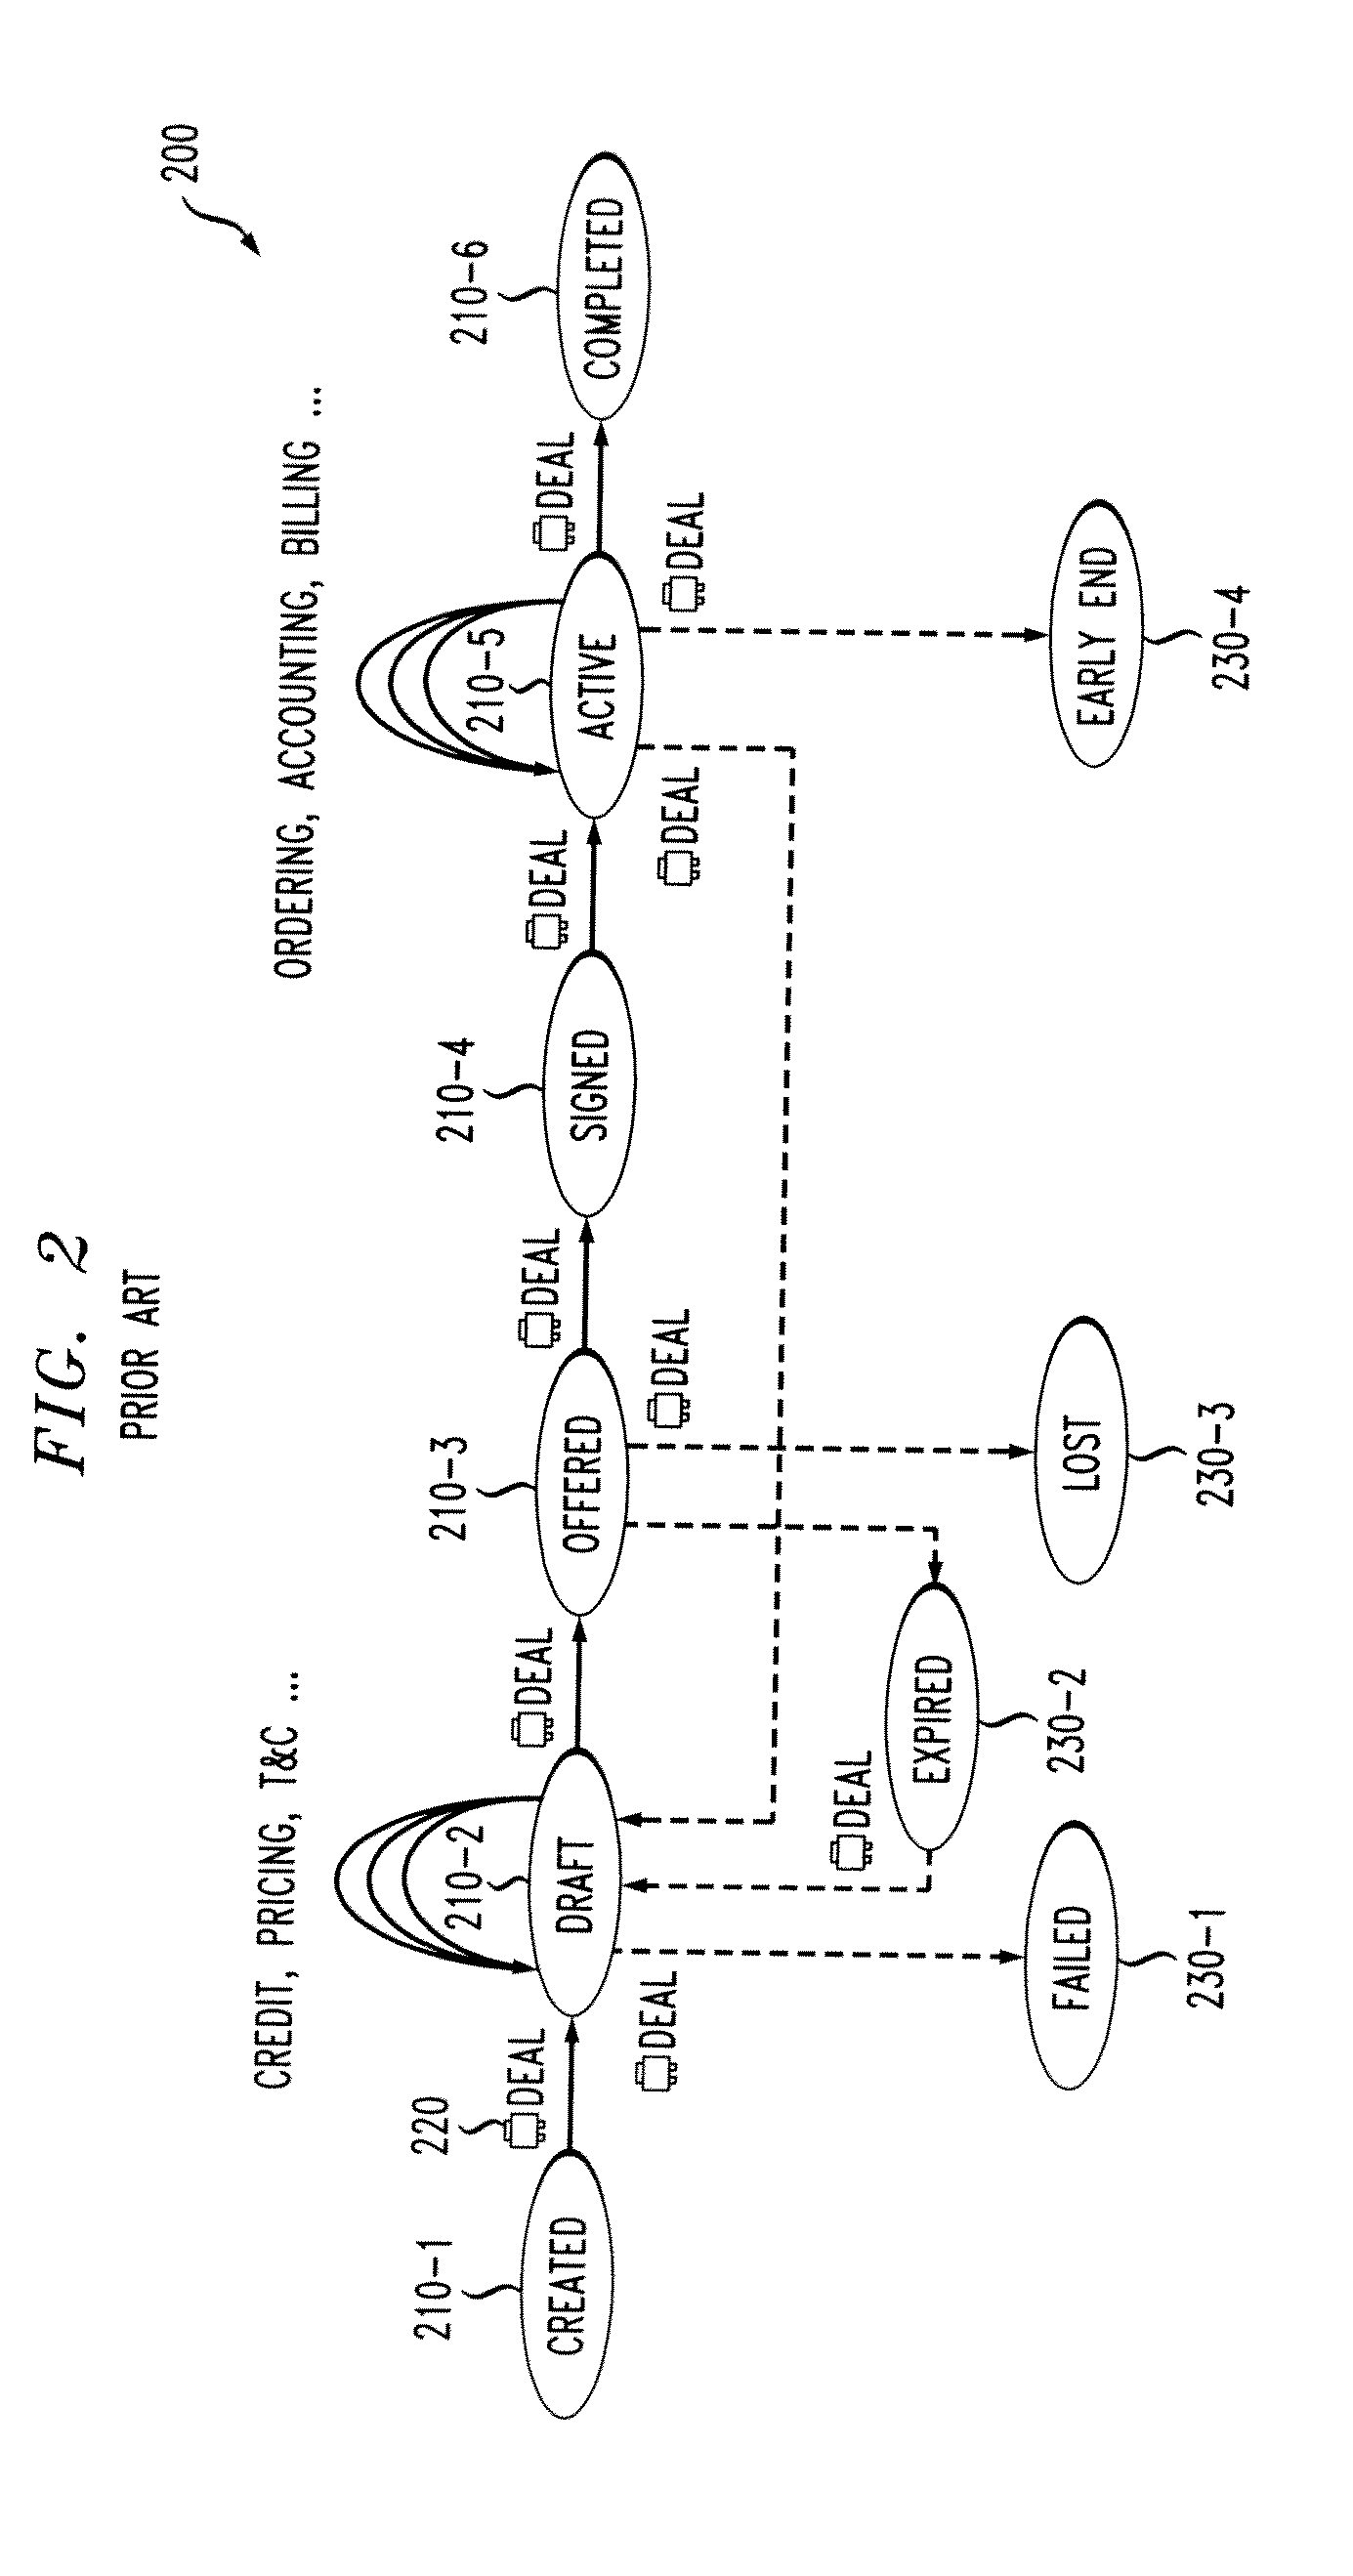 Method and Apparatus for Specifying Monitoring Intent of a Business Process or Monitoring Template